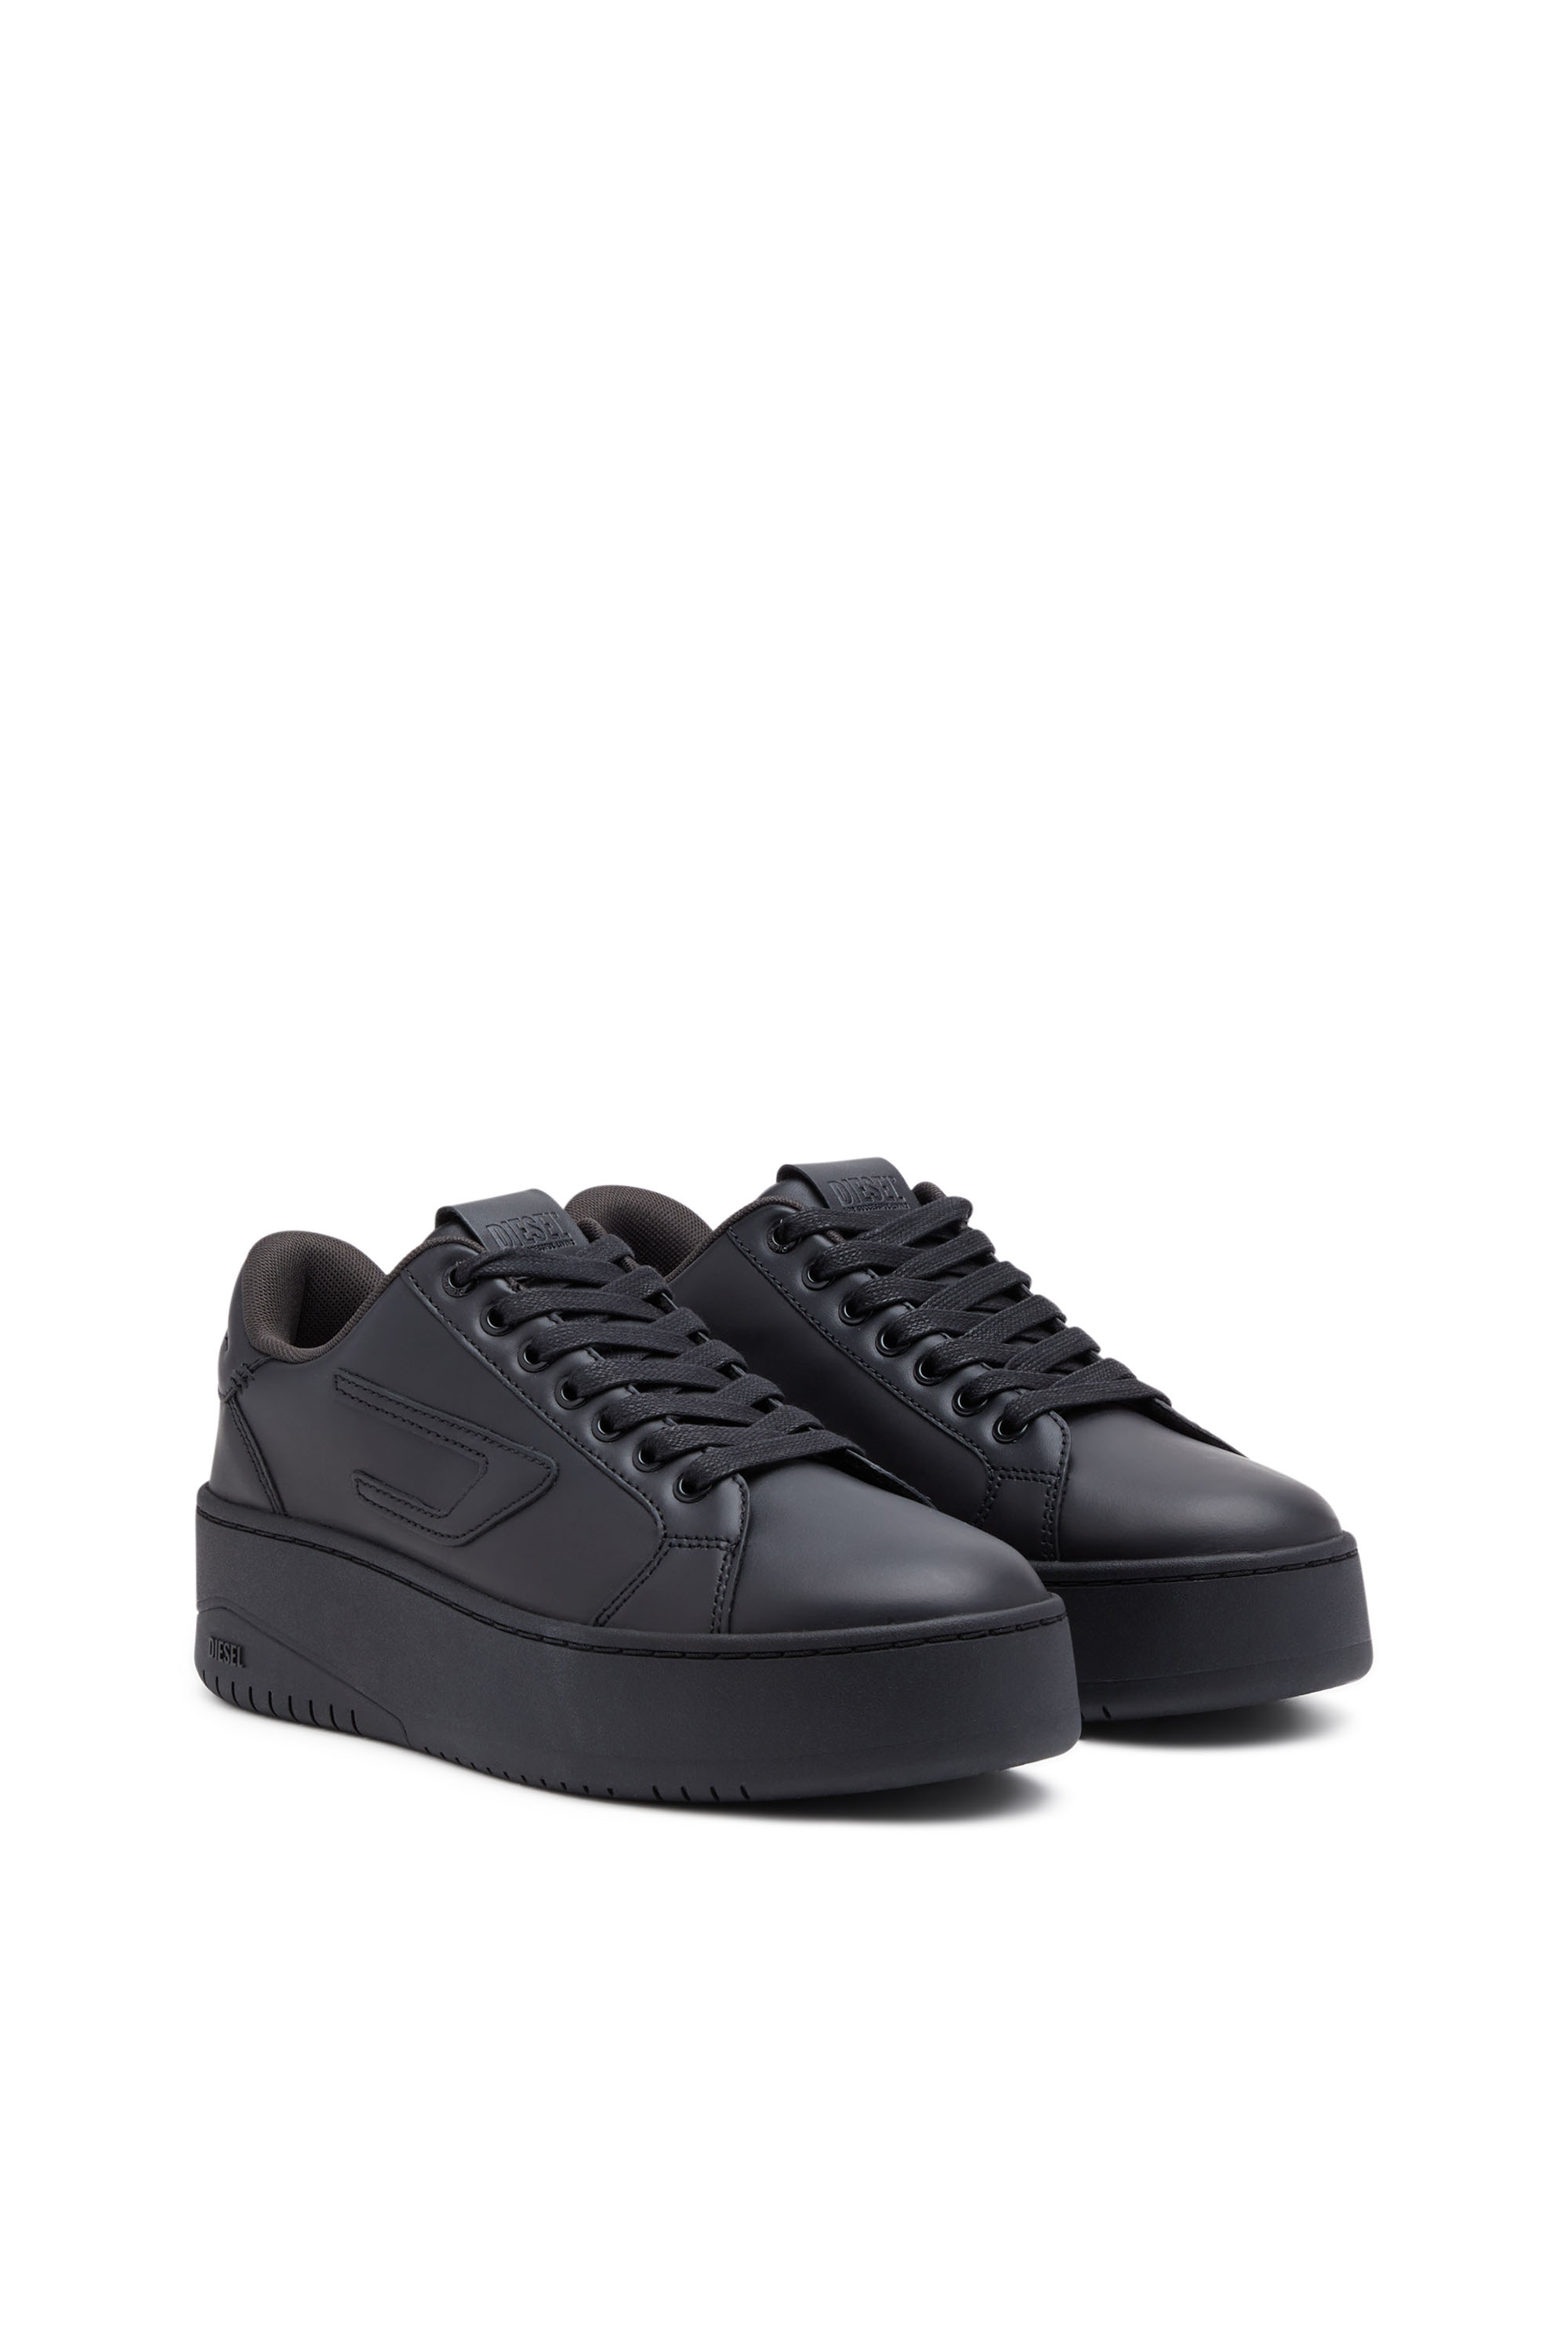 Diesel - S-ATHENE BOLD X, Woman S-Athene Bold-Flatform sneakers in leather in Black - Image 2